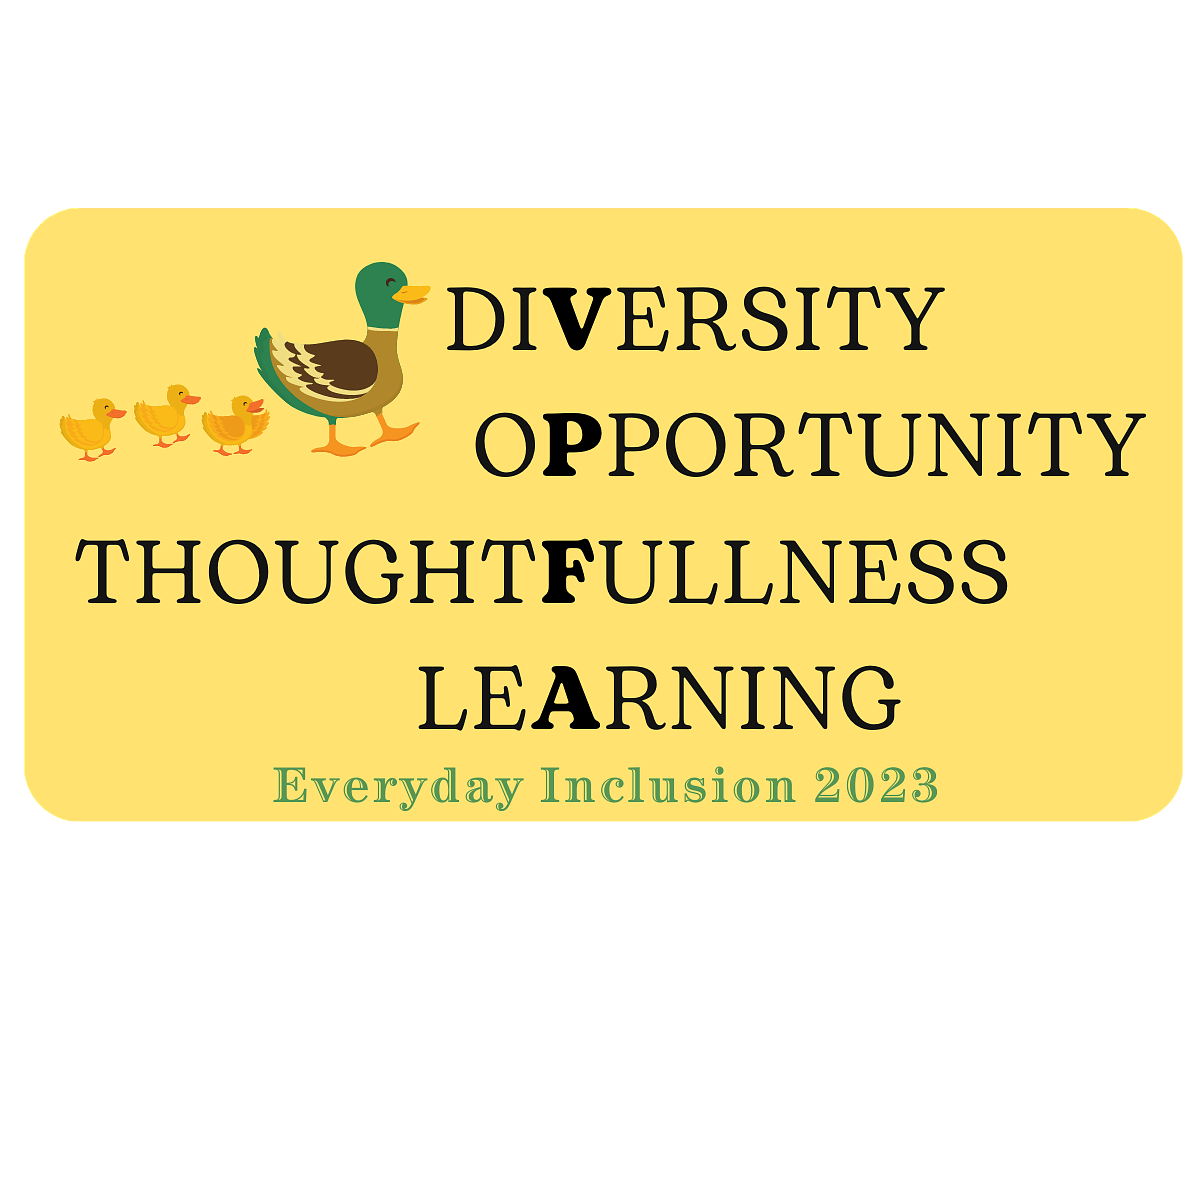 Diversity Opportunity Thoughtfullness Learning with the VPFA of each word in bold. Image of a duck and three ducklings. Everyday Inclusion 2023 at the bottom